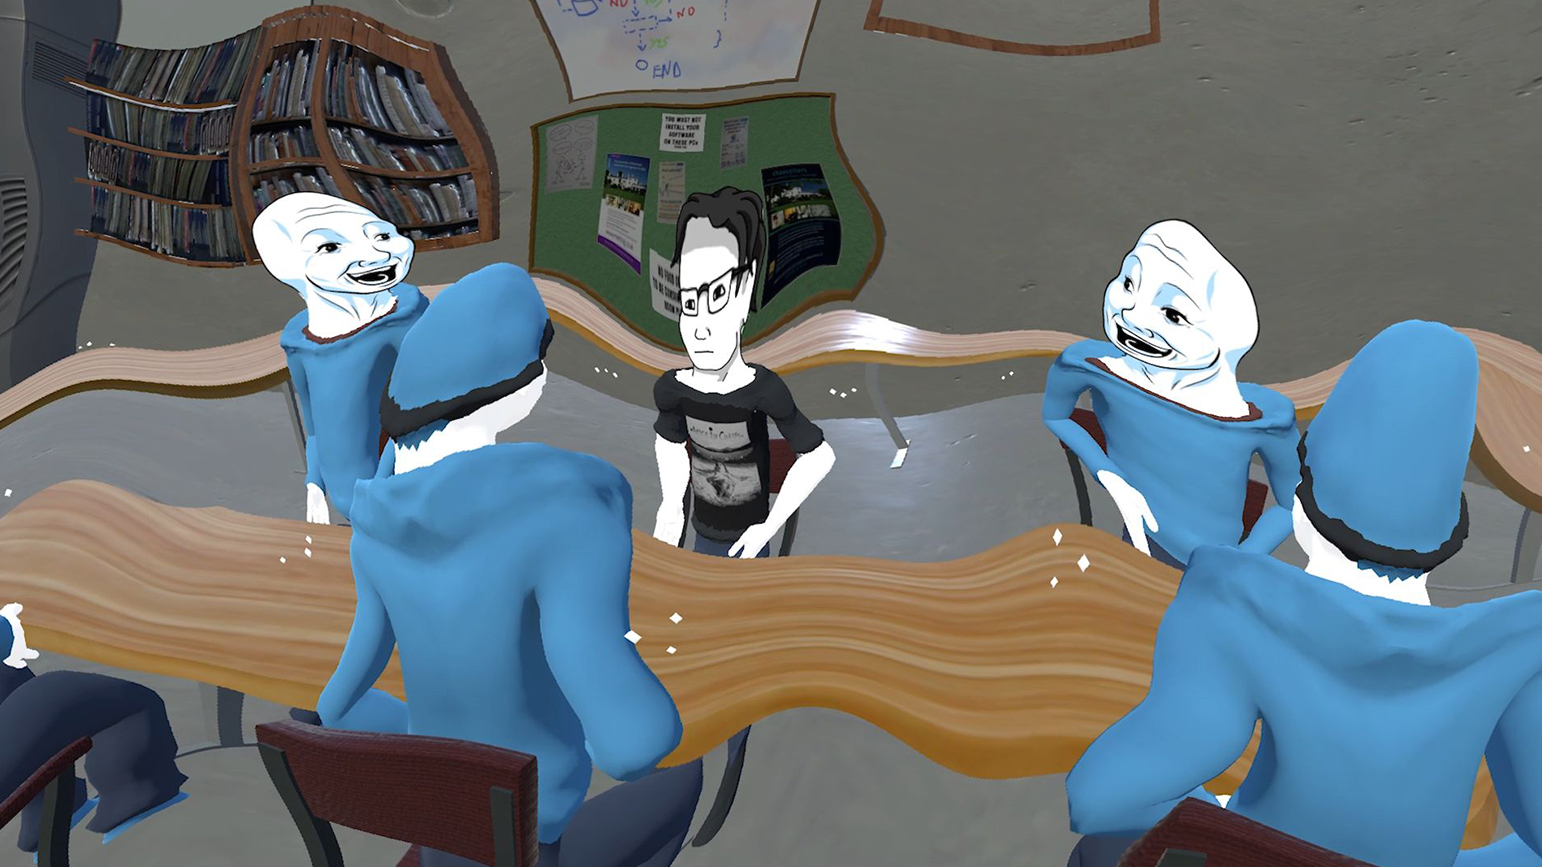 Warped still animation of 5 people sitting around a table, four wearing identical blue hoodies